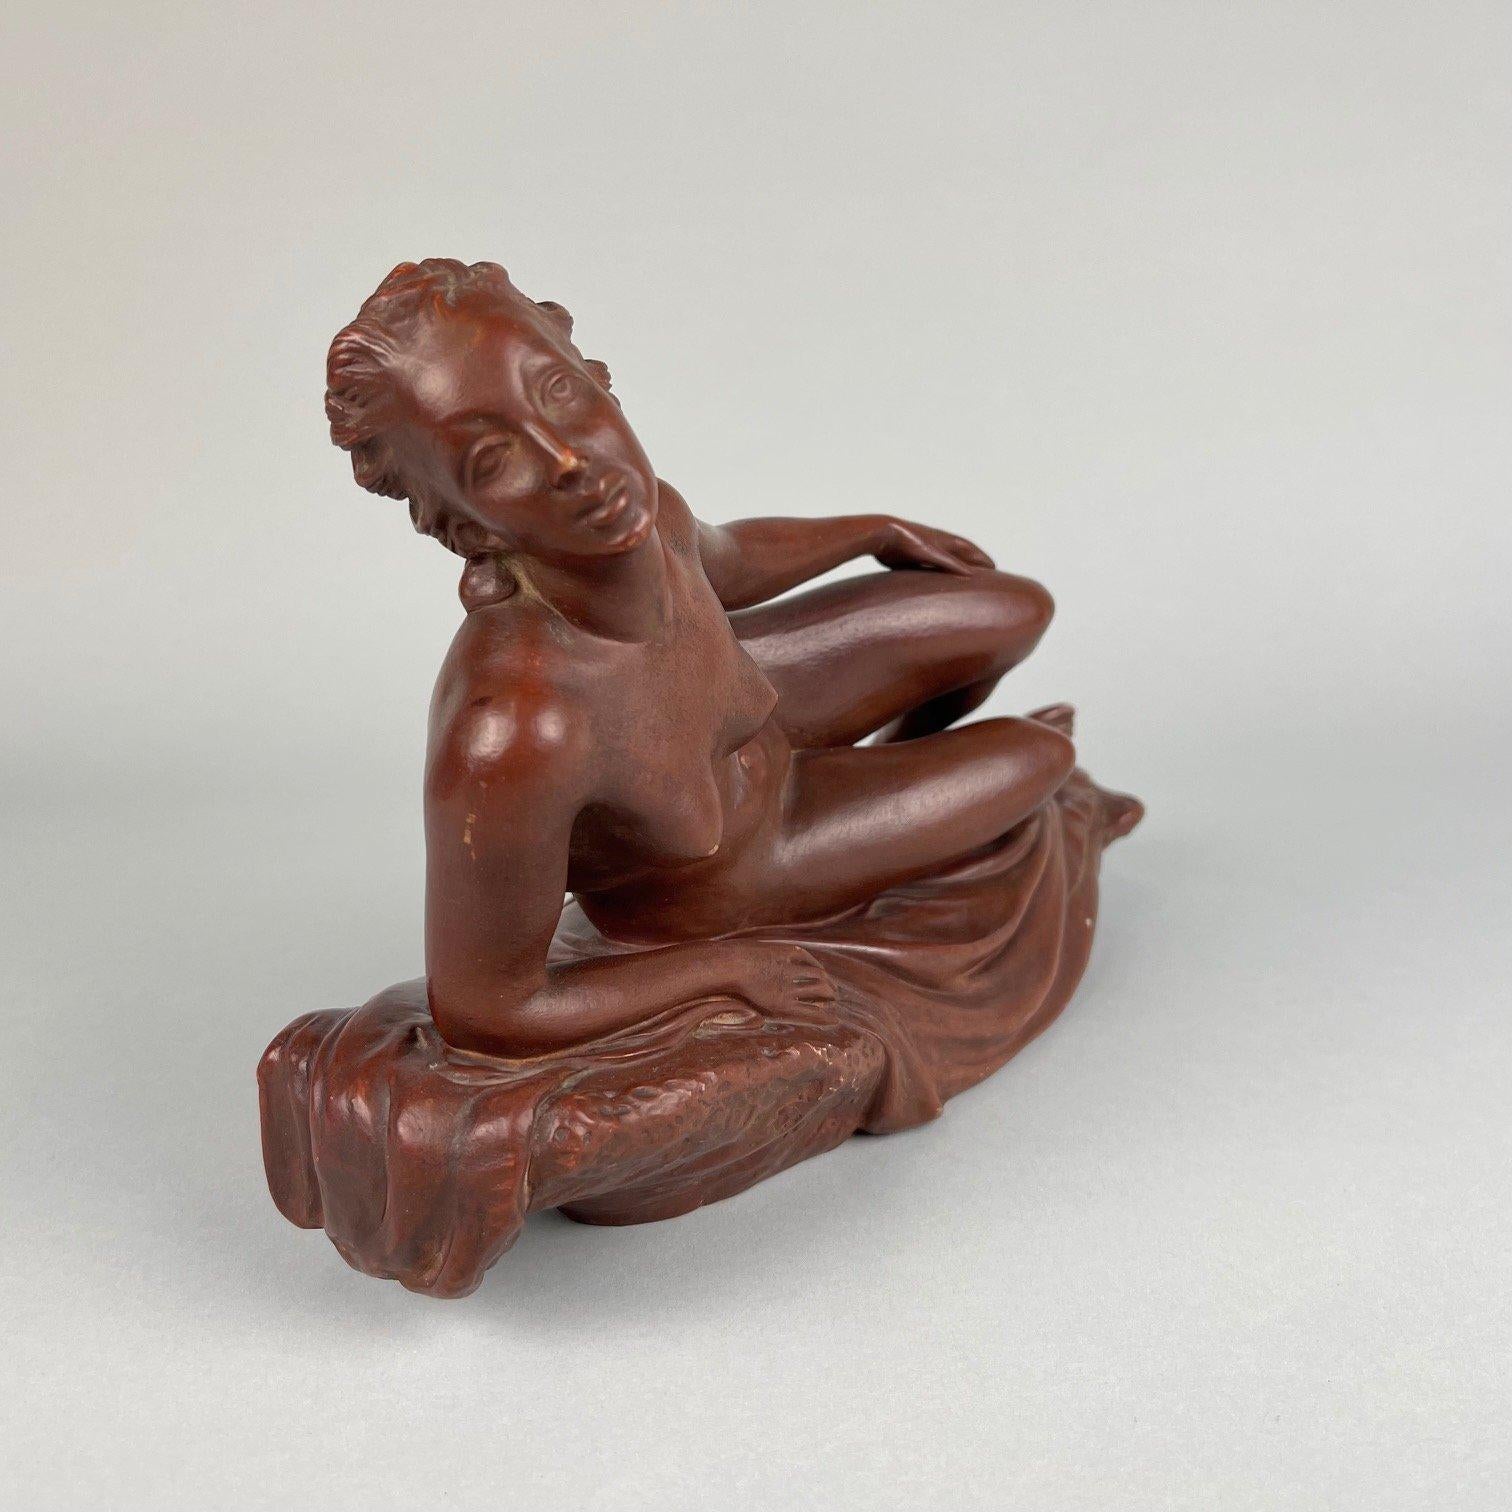 Vintage terracotta sculpture. Beautiful piece of female nude, marked J.Vanca.
Josef Vanca (1908-1988), sculptor and ceramist, was born in Dresden (Germany), studied in Prague (Czech Republic, former Czechoslovakia) at the Academy of Arts and Crafts